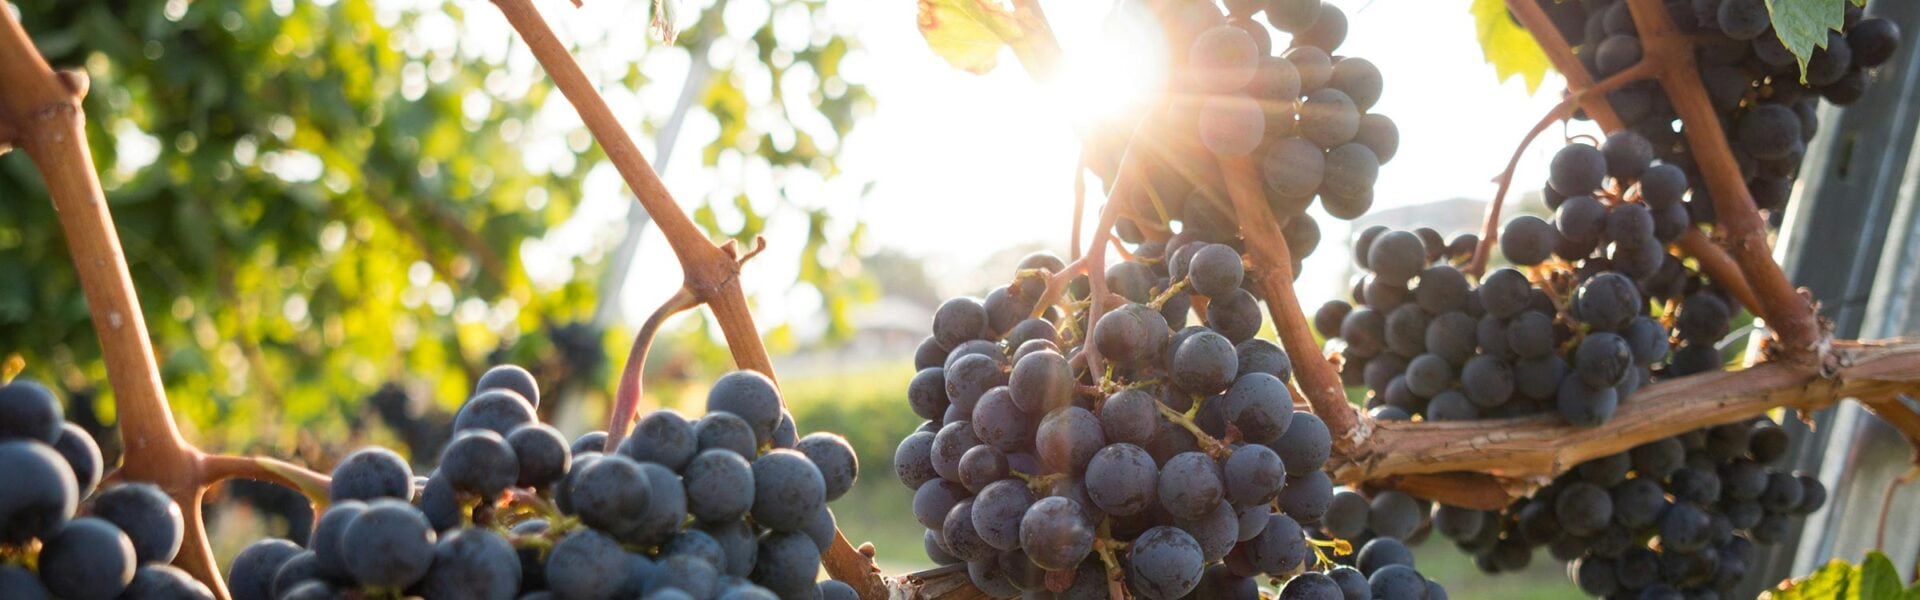 A close up image of grapes on the vine with the sunlight coming through.